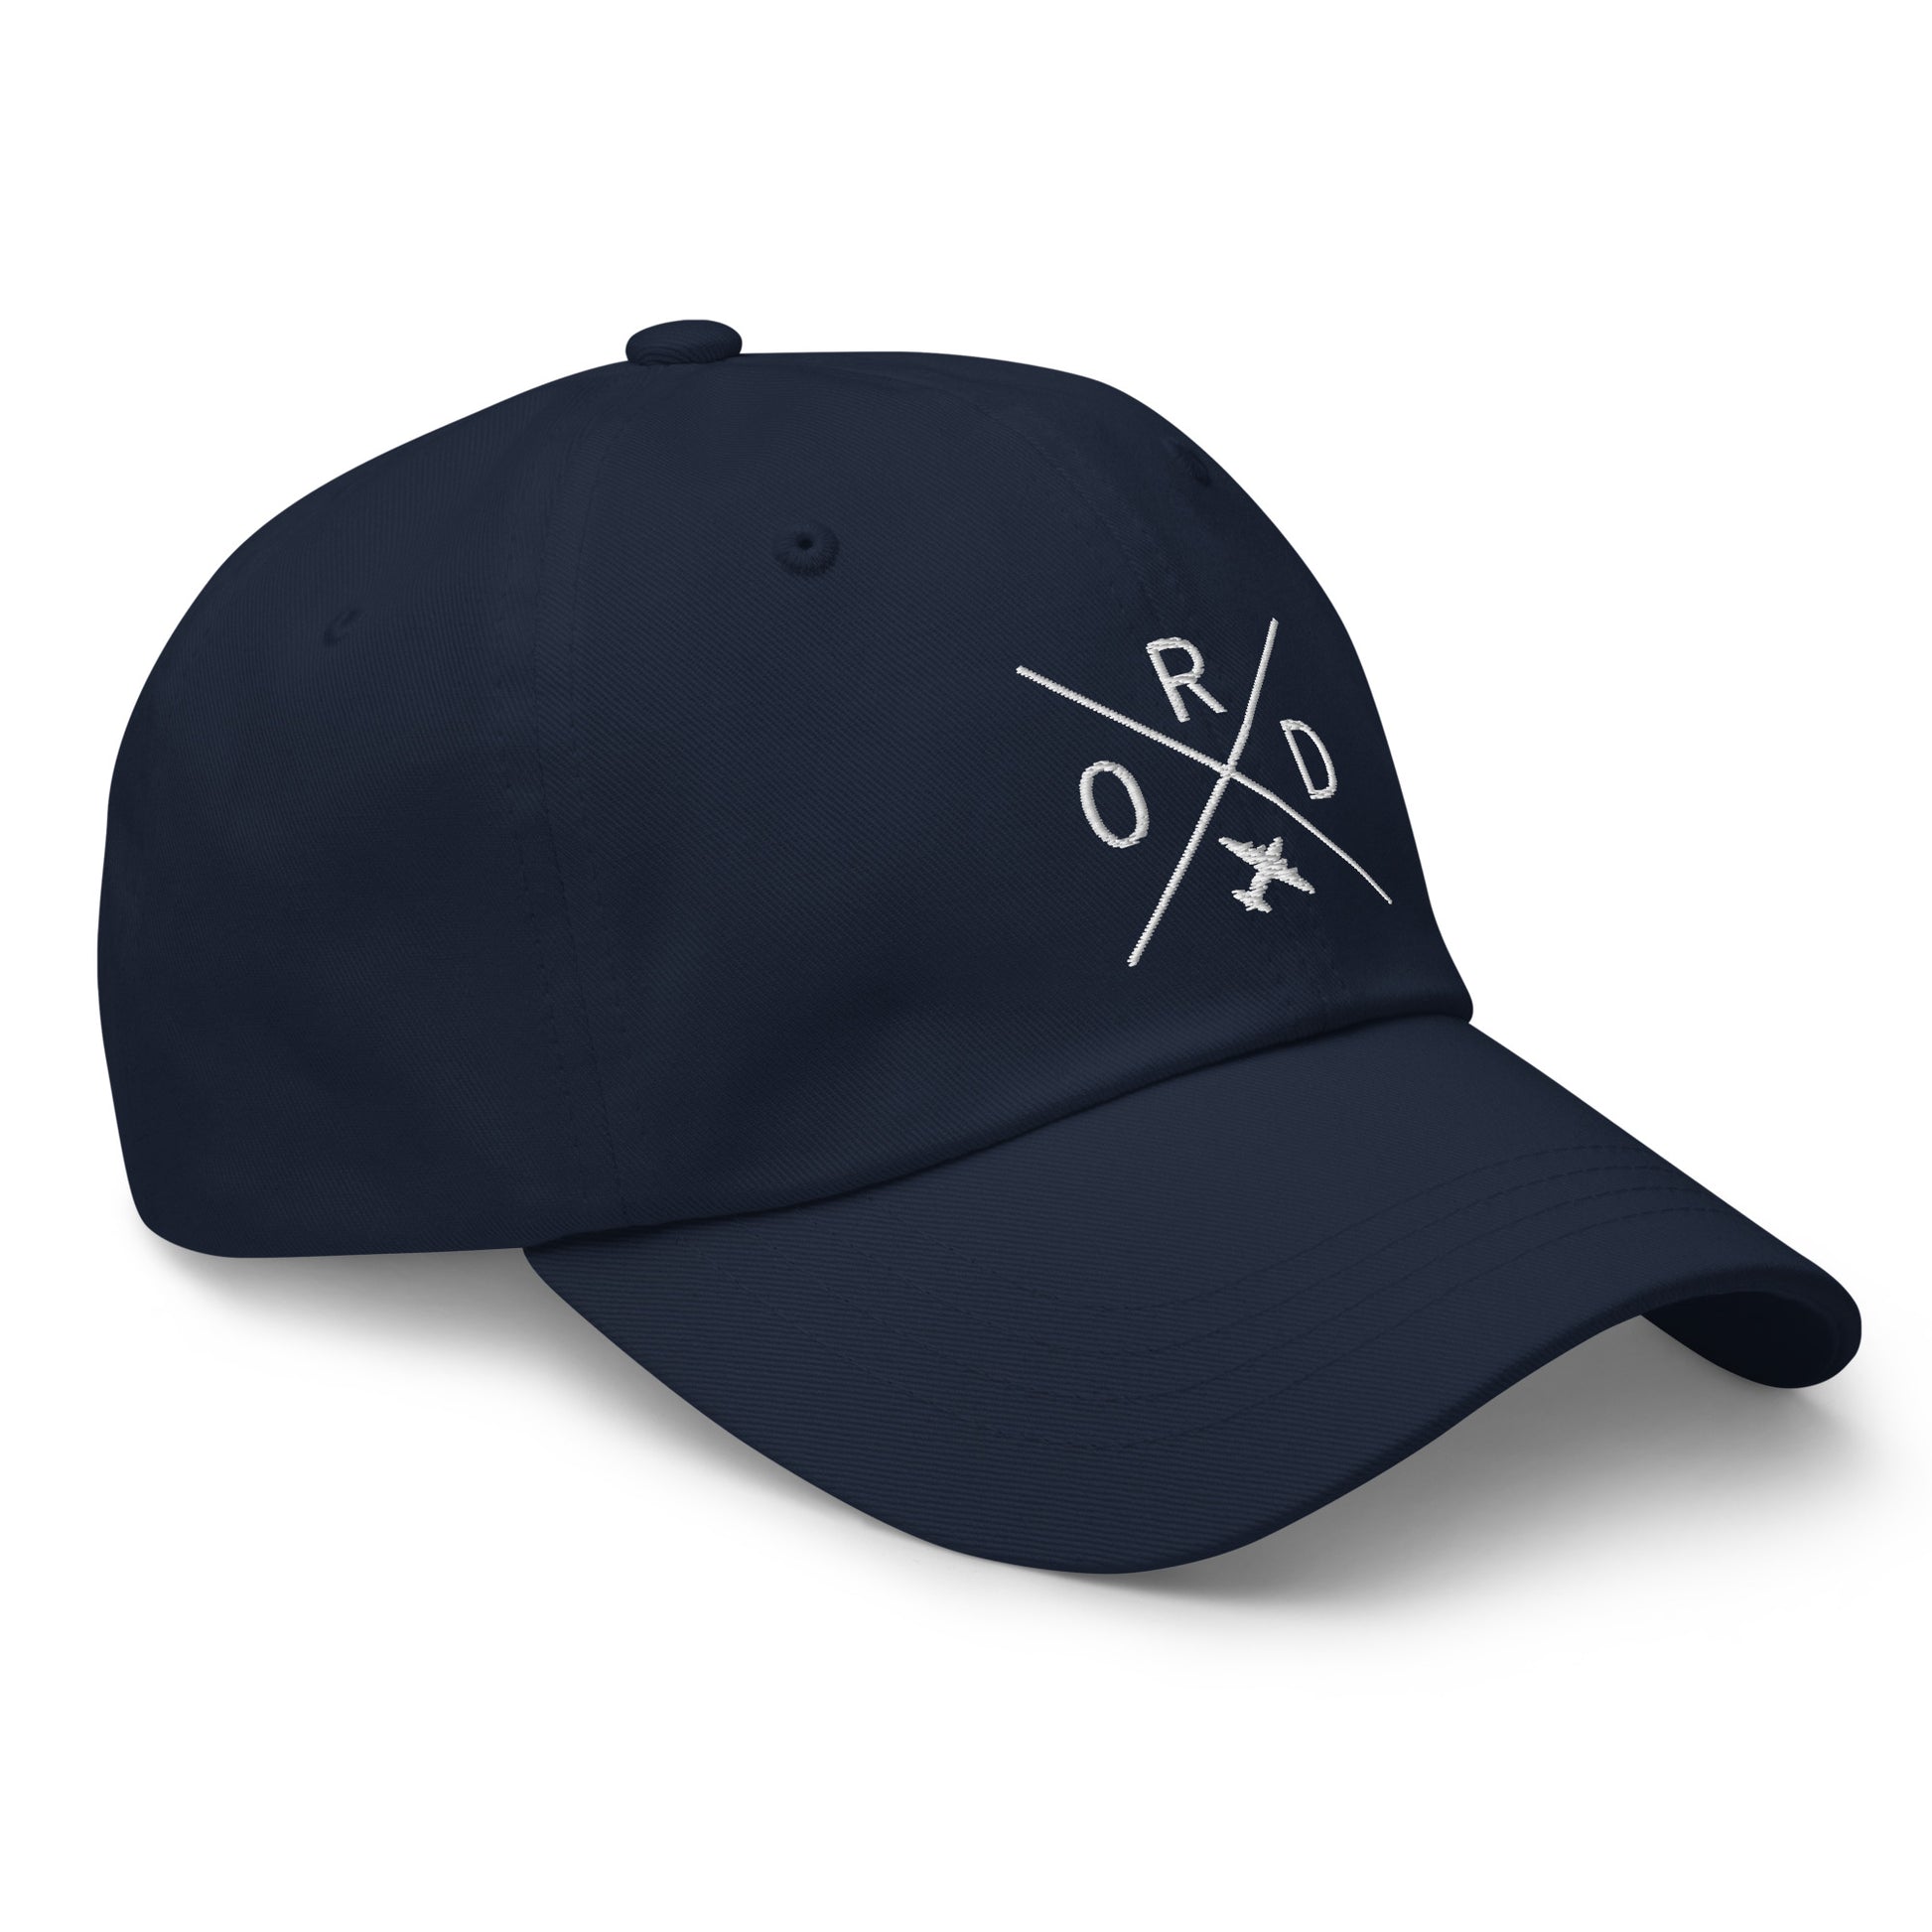 Crossed-X Dad Hat - White • ORD Chicago • YHM Designs - Image 17